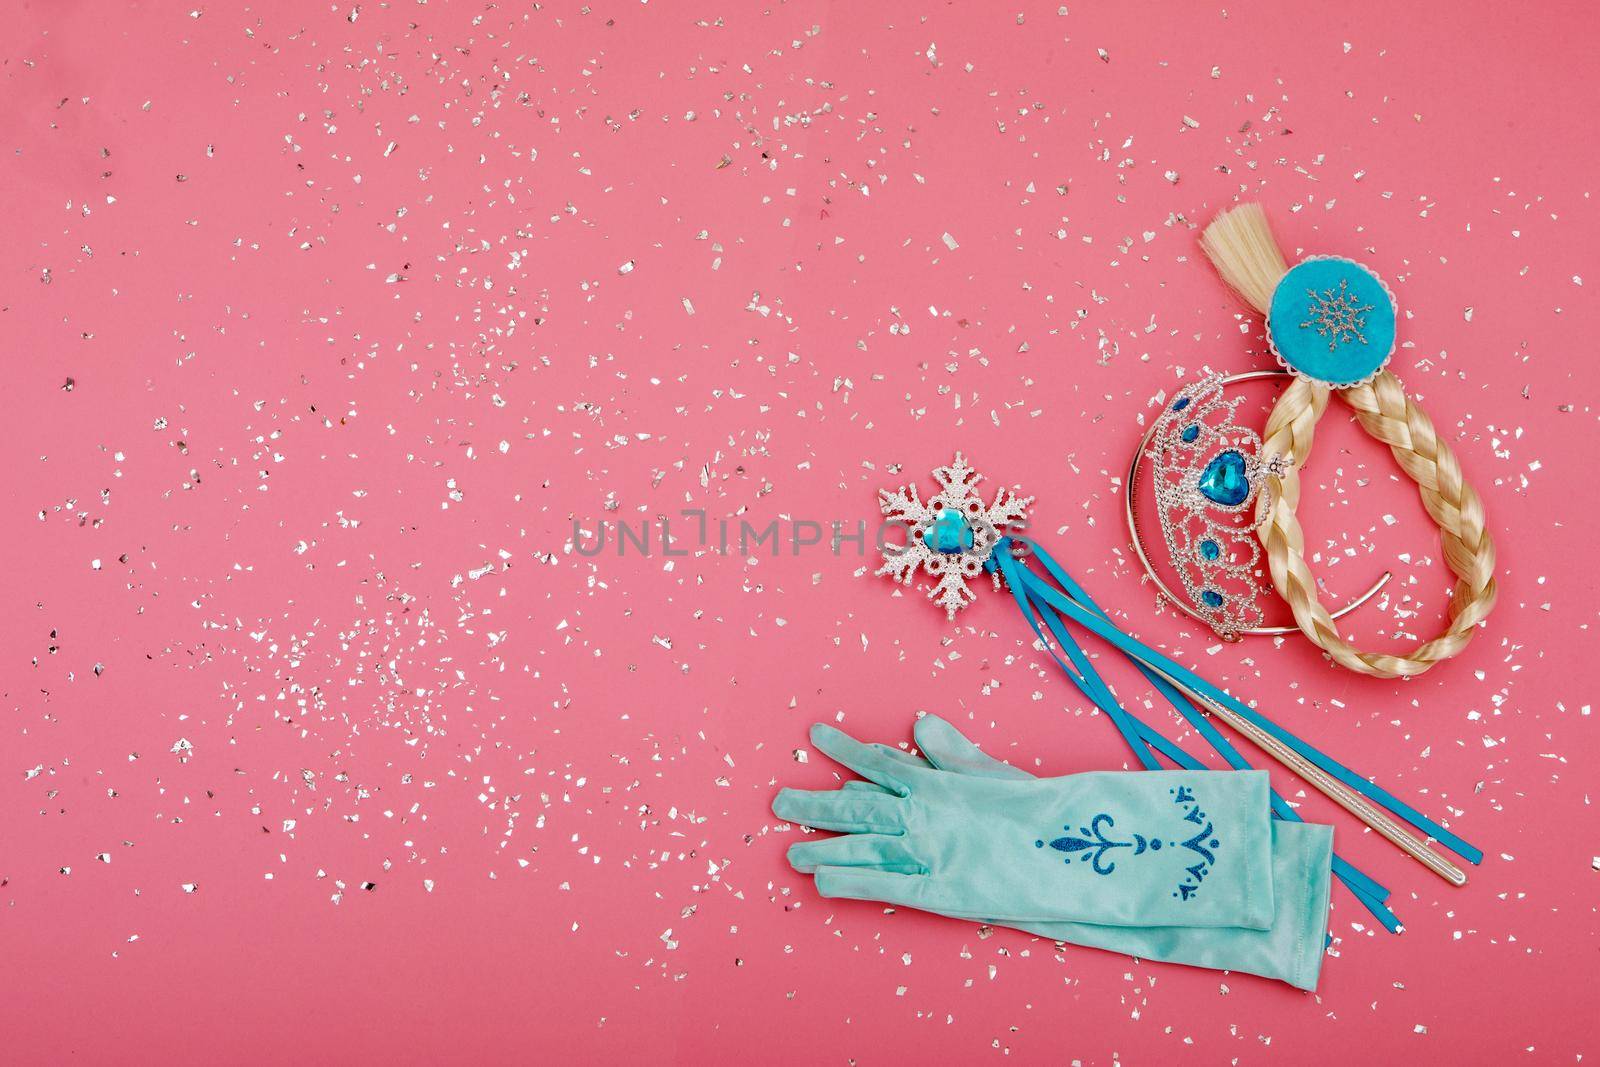 From above of magic wand and gloves placed near crown and pigtail on pink background with silver glitter